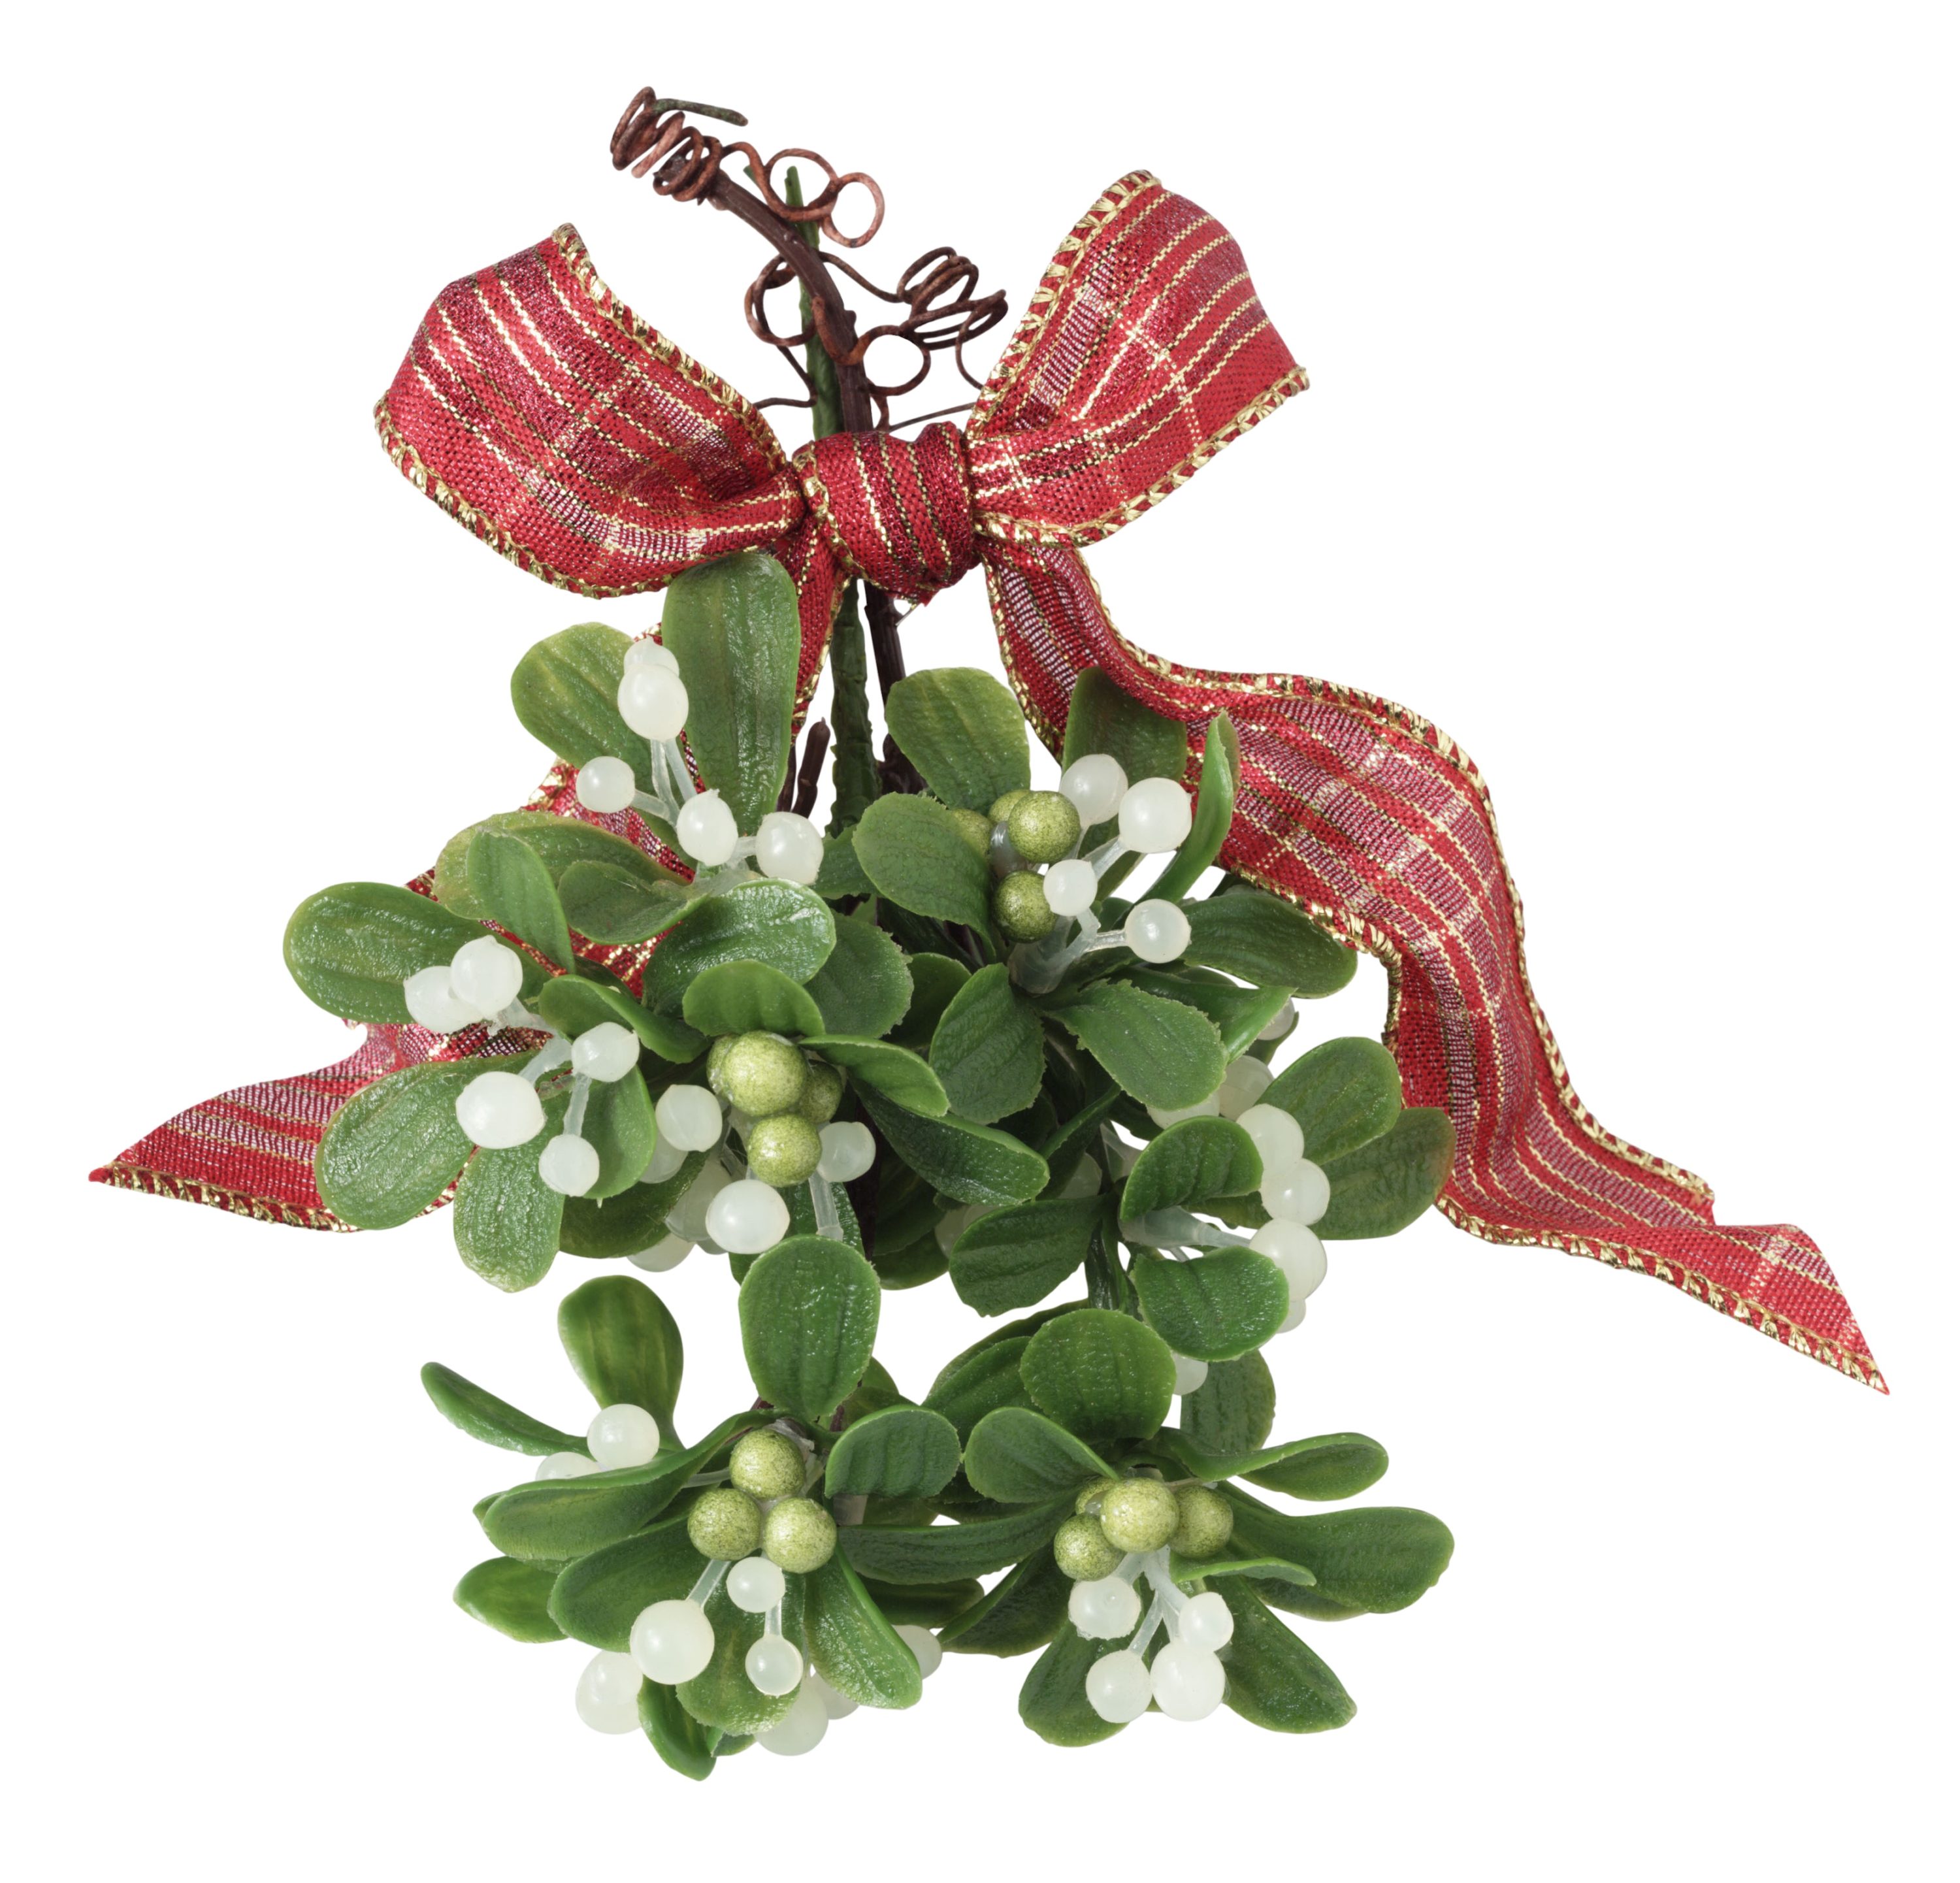 Mistletoe - What exactly is this iconic Christmas Symbol that is also associated with kissing during the Christmas Season? #Mistletoe